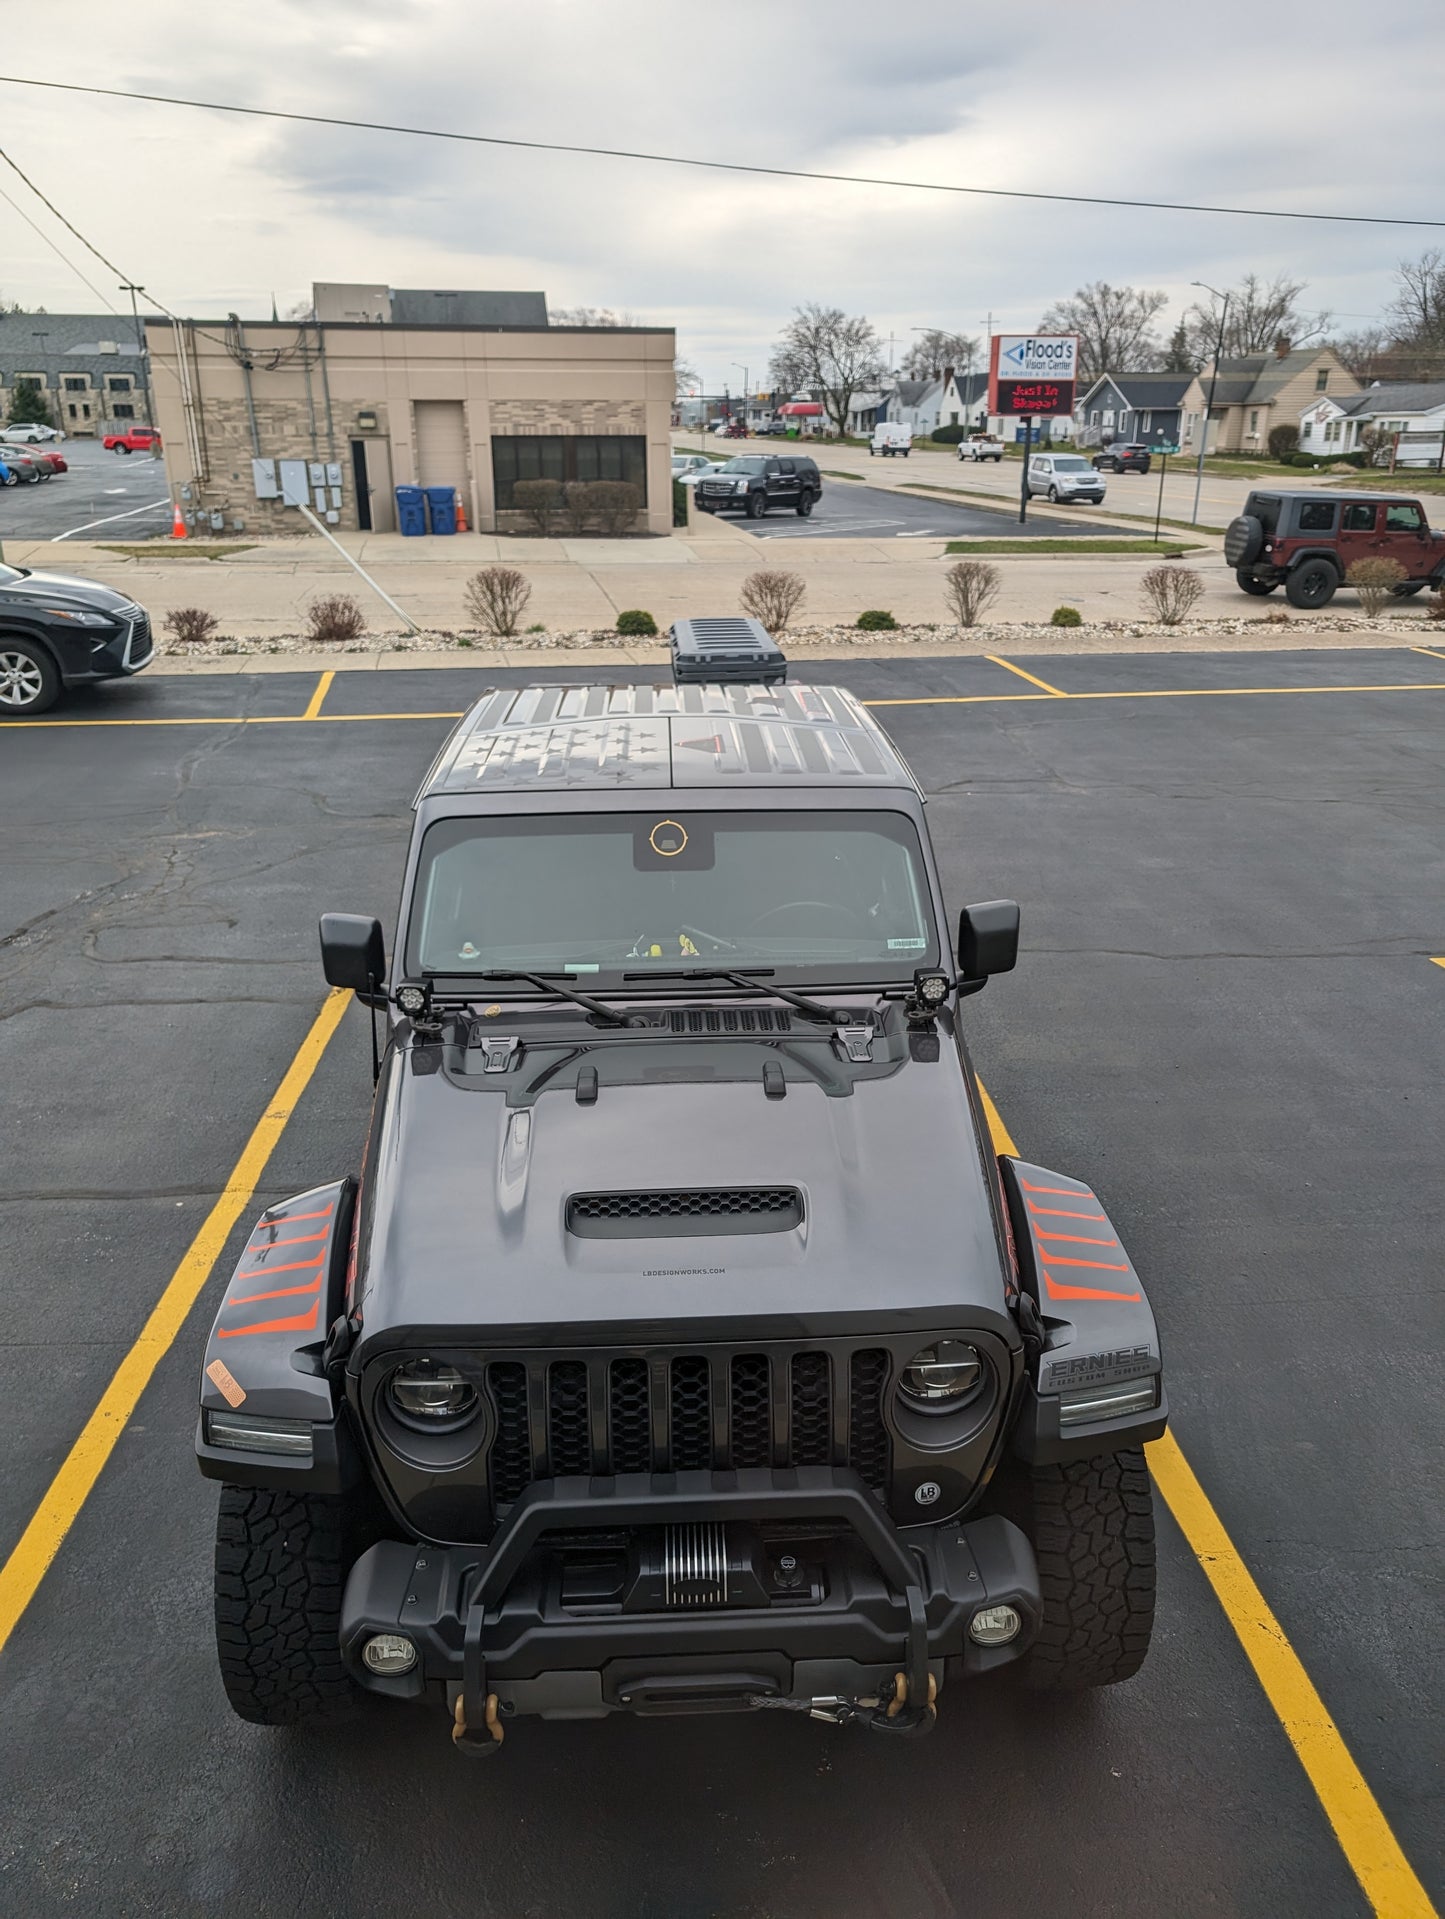 Fender Top Louver Slash Decal Set-Pair- fits JL, JK Wrangler and 2020 and newer Jeep Gladiator and More